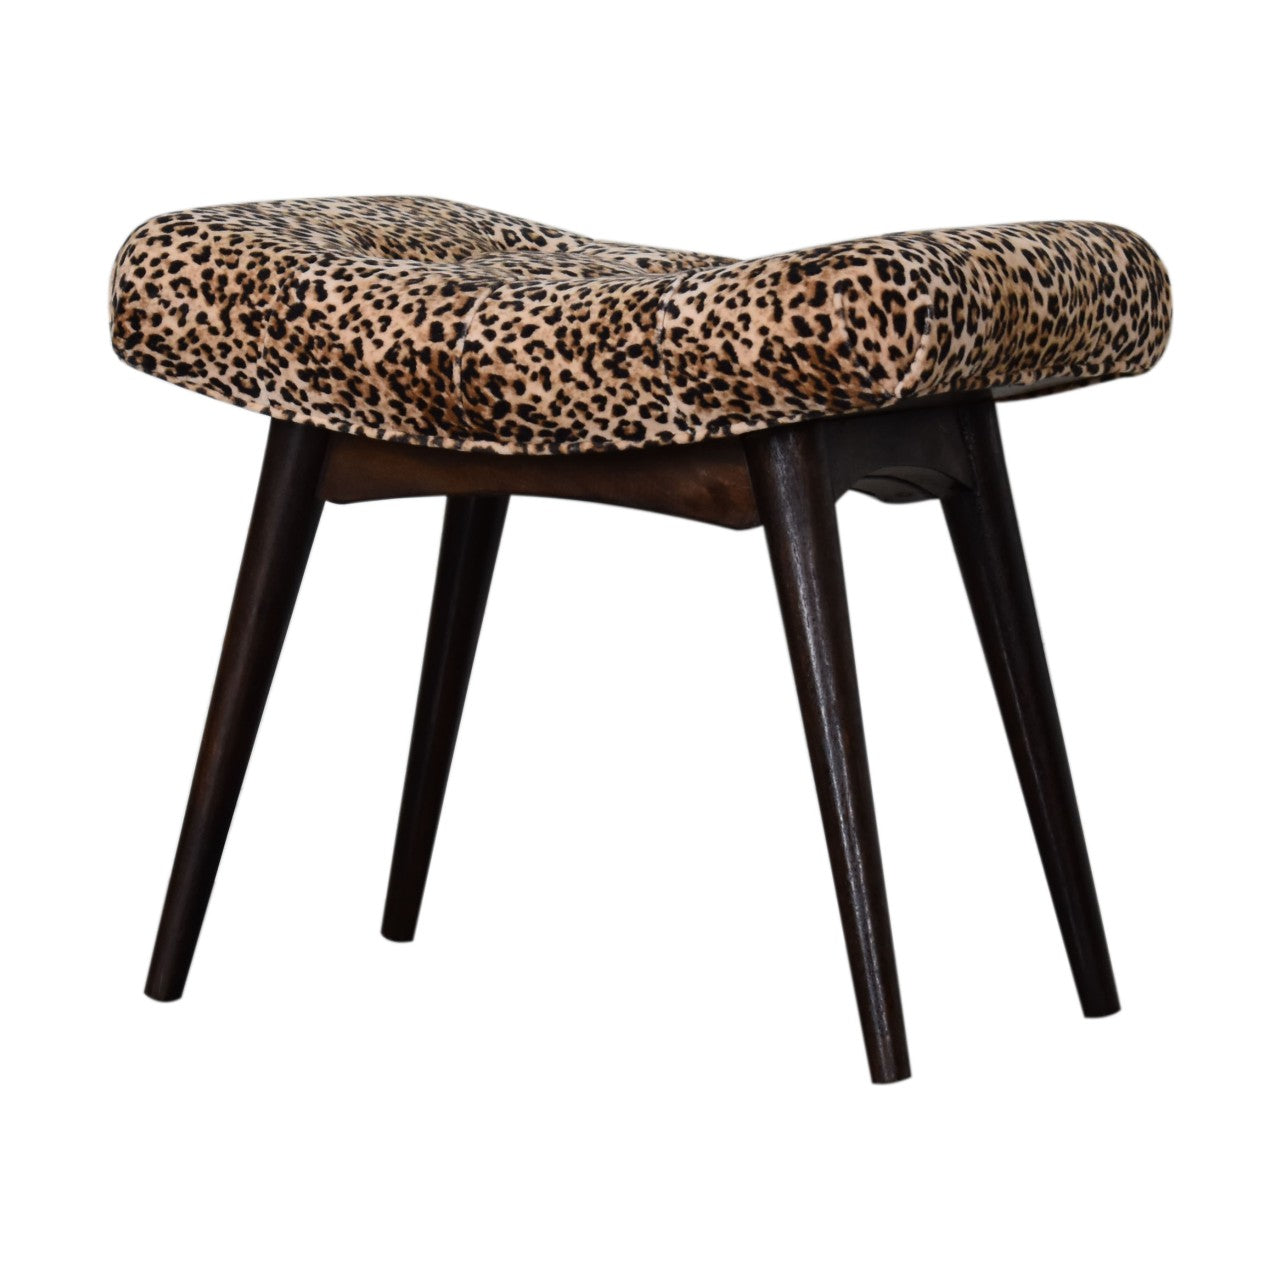 Leopard Print Curved Bench - mancavesuperstore